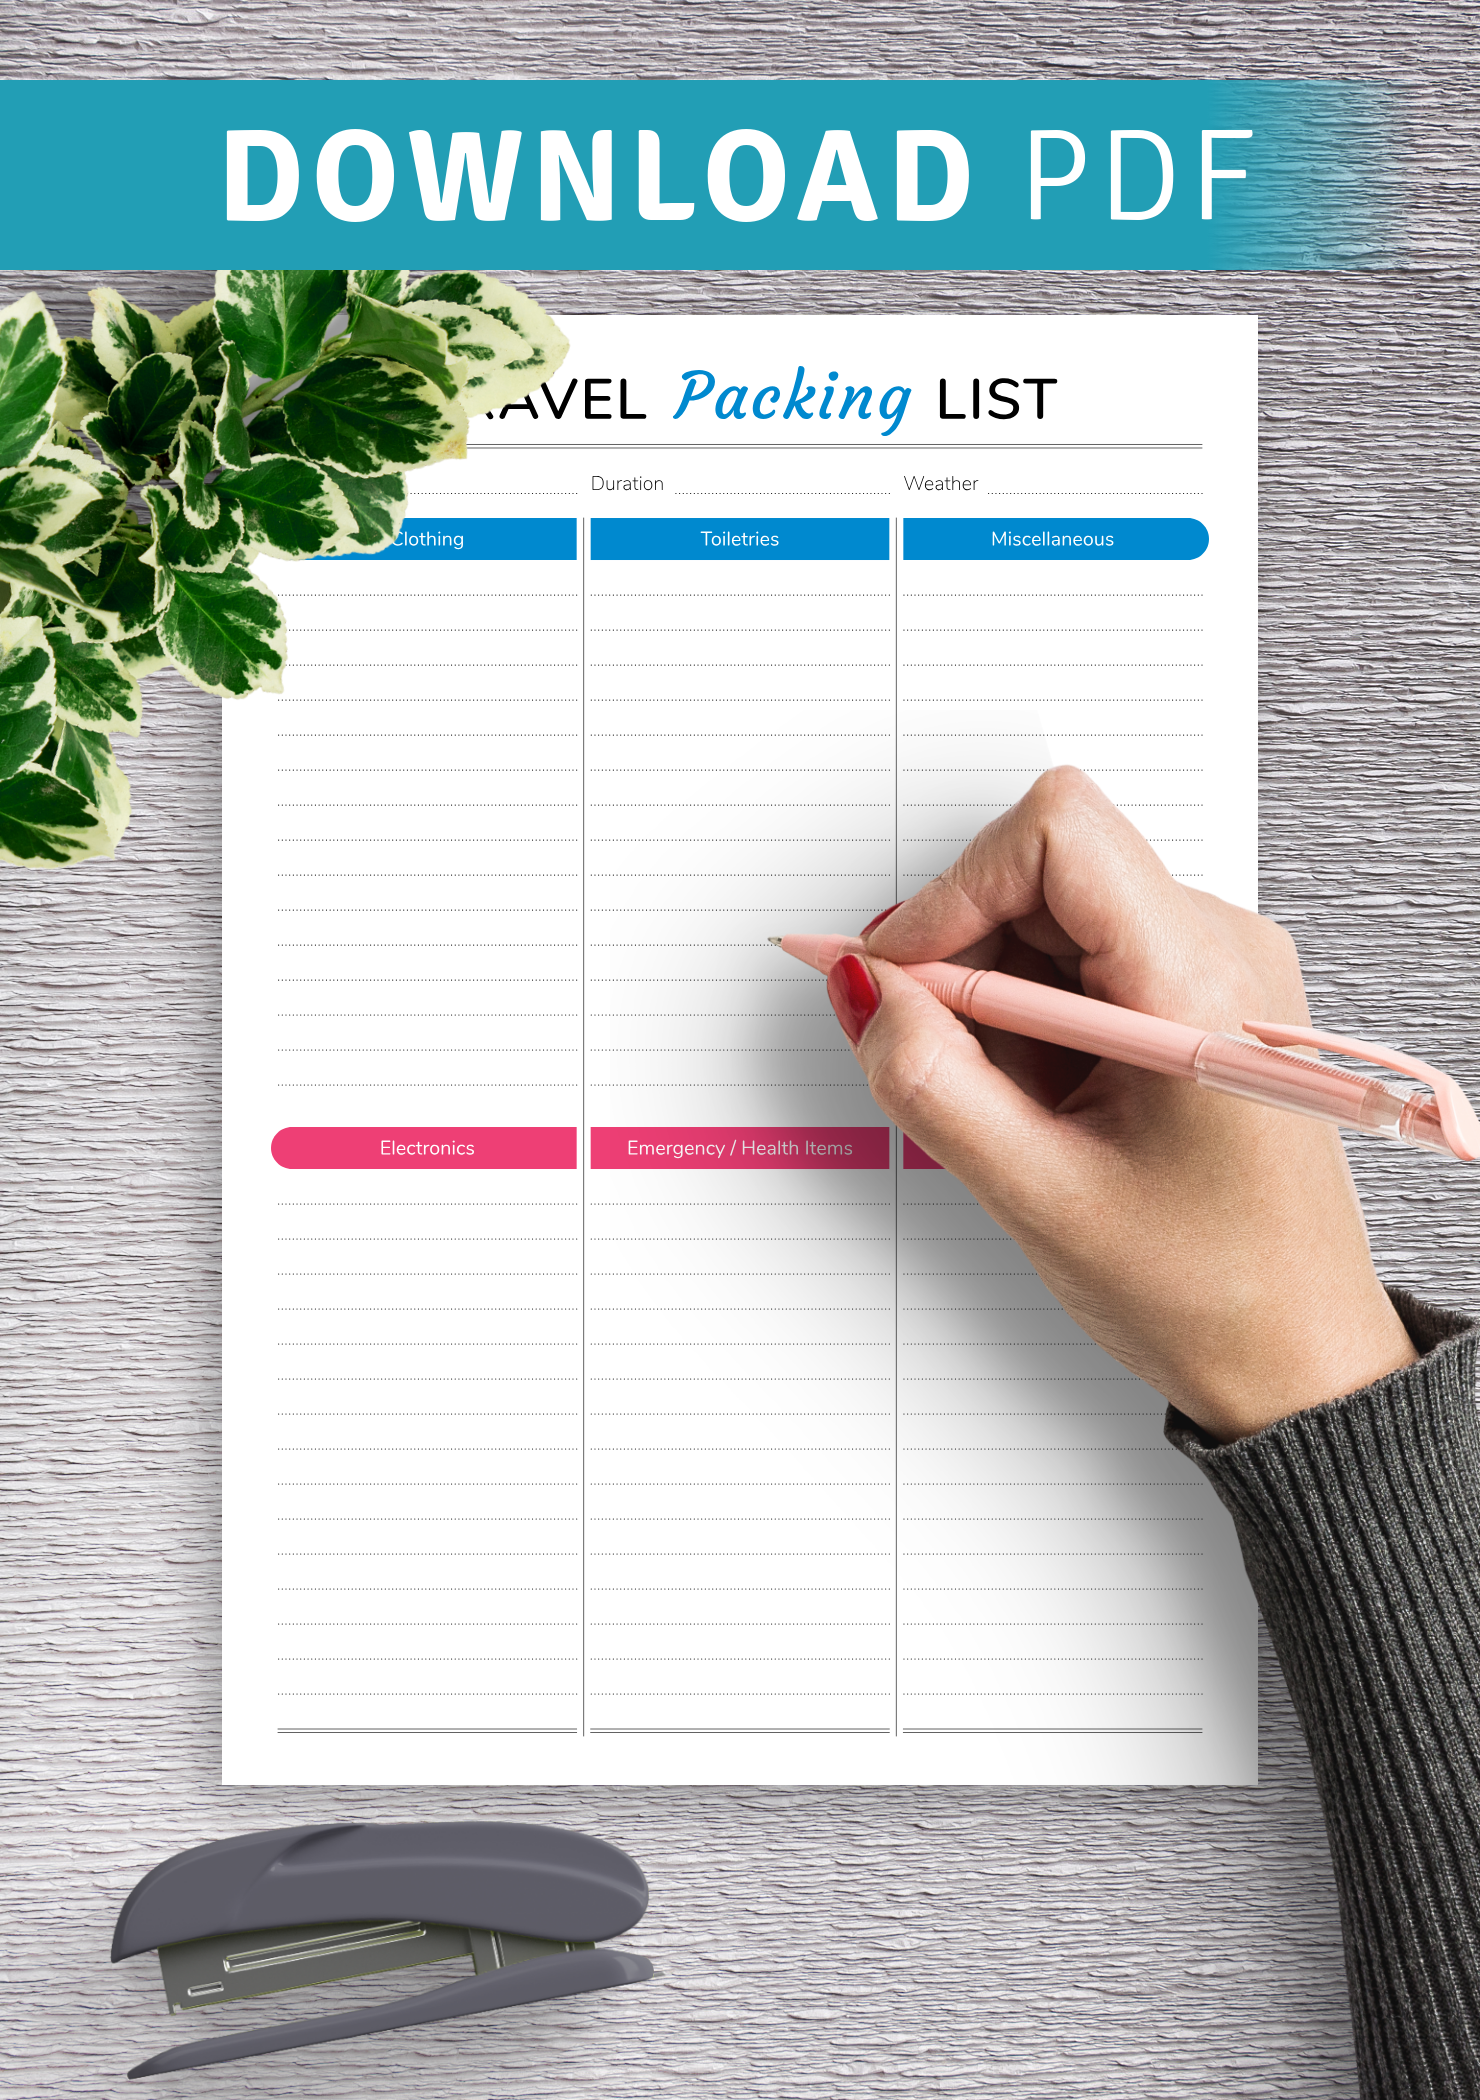 8-family-vacation-packing-list-template-sampletemplatess-travel